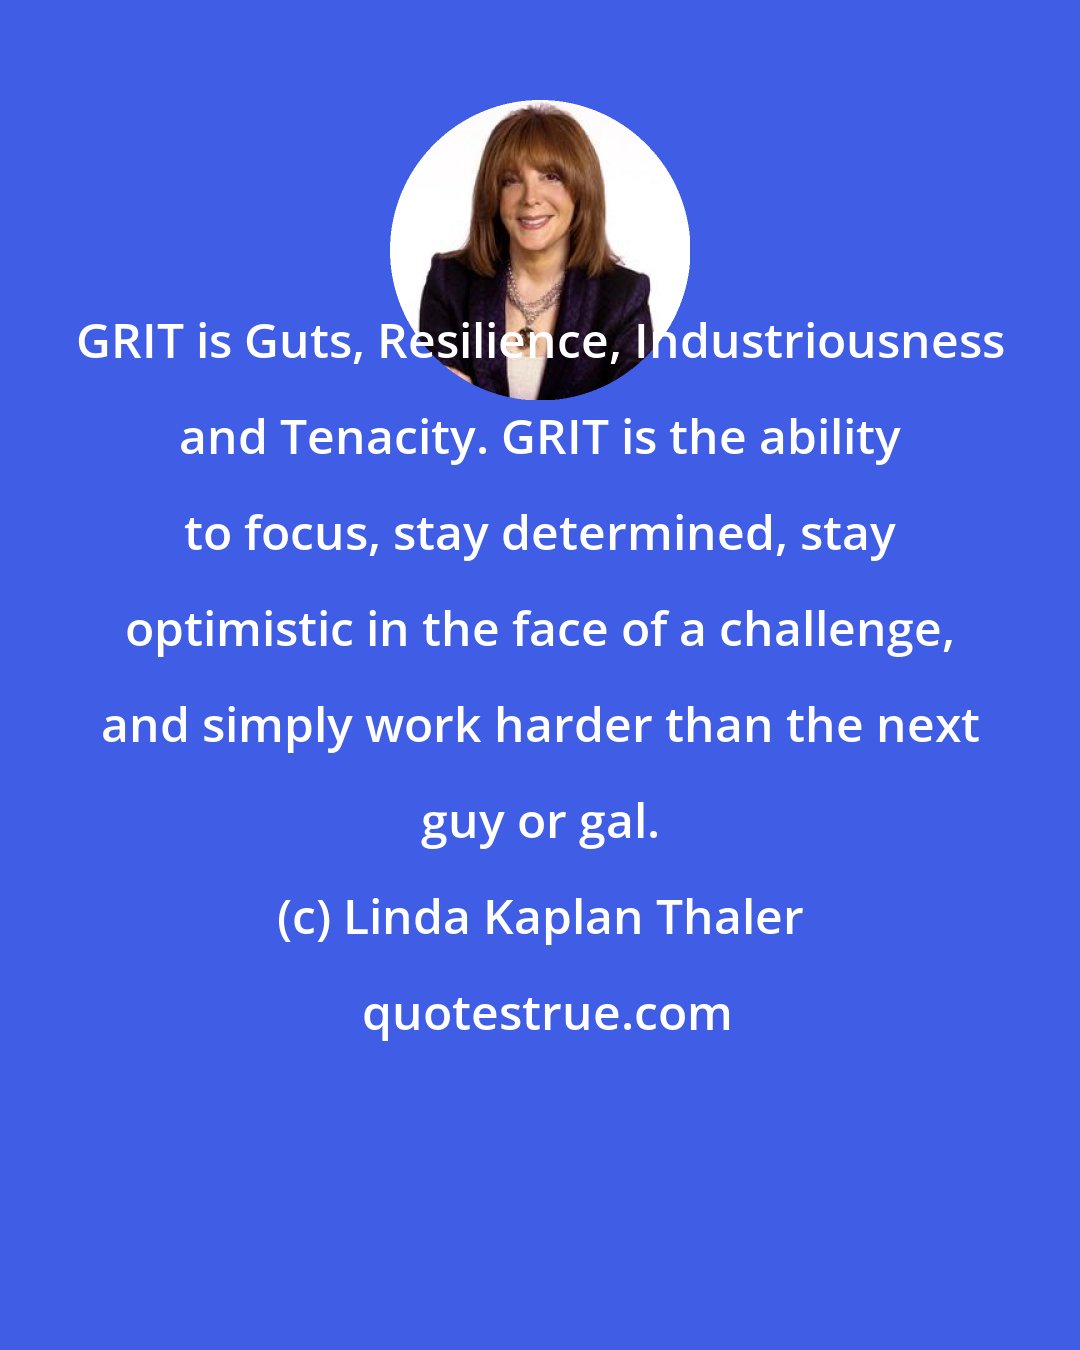 Linda Kaplan Thaler: GRIT is Guts, Resilience, Industriousness and Tenacity. GRIT is the ability to focus, stay determined, stay optimistic in the face of a challenge, and simply work harder than the next guy or gal.